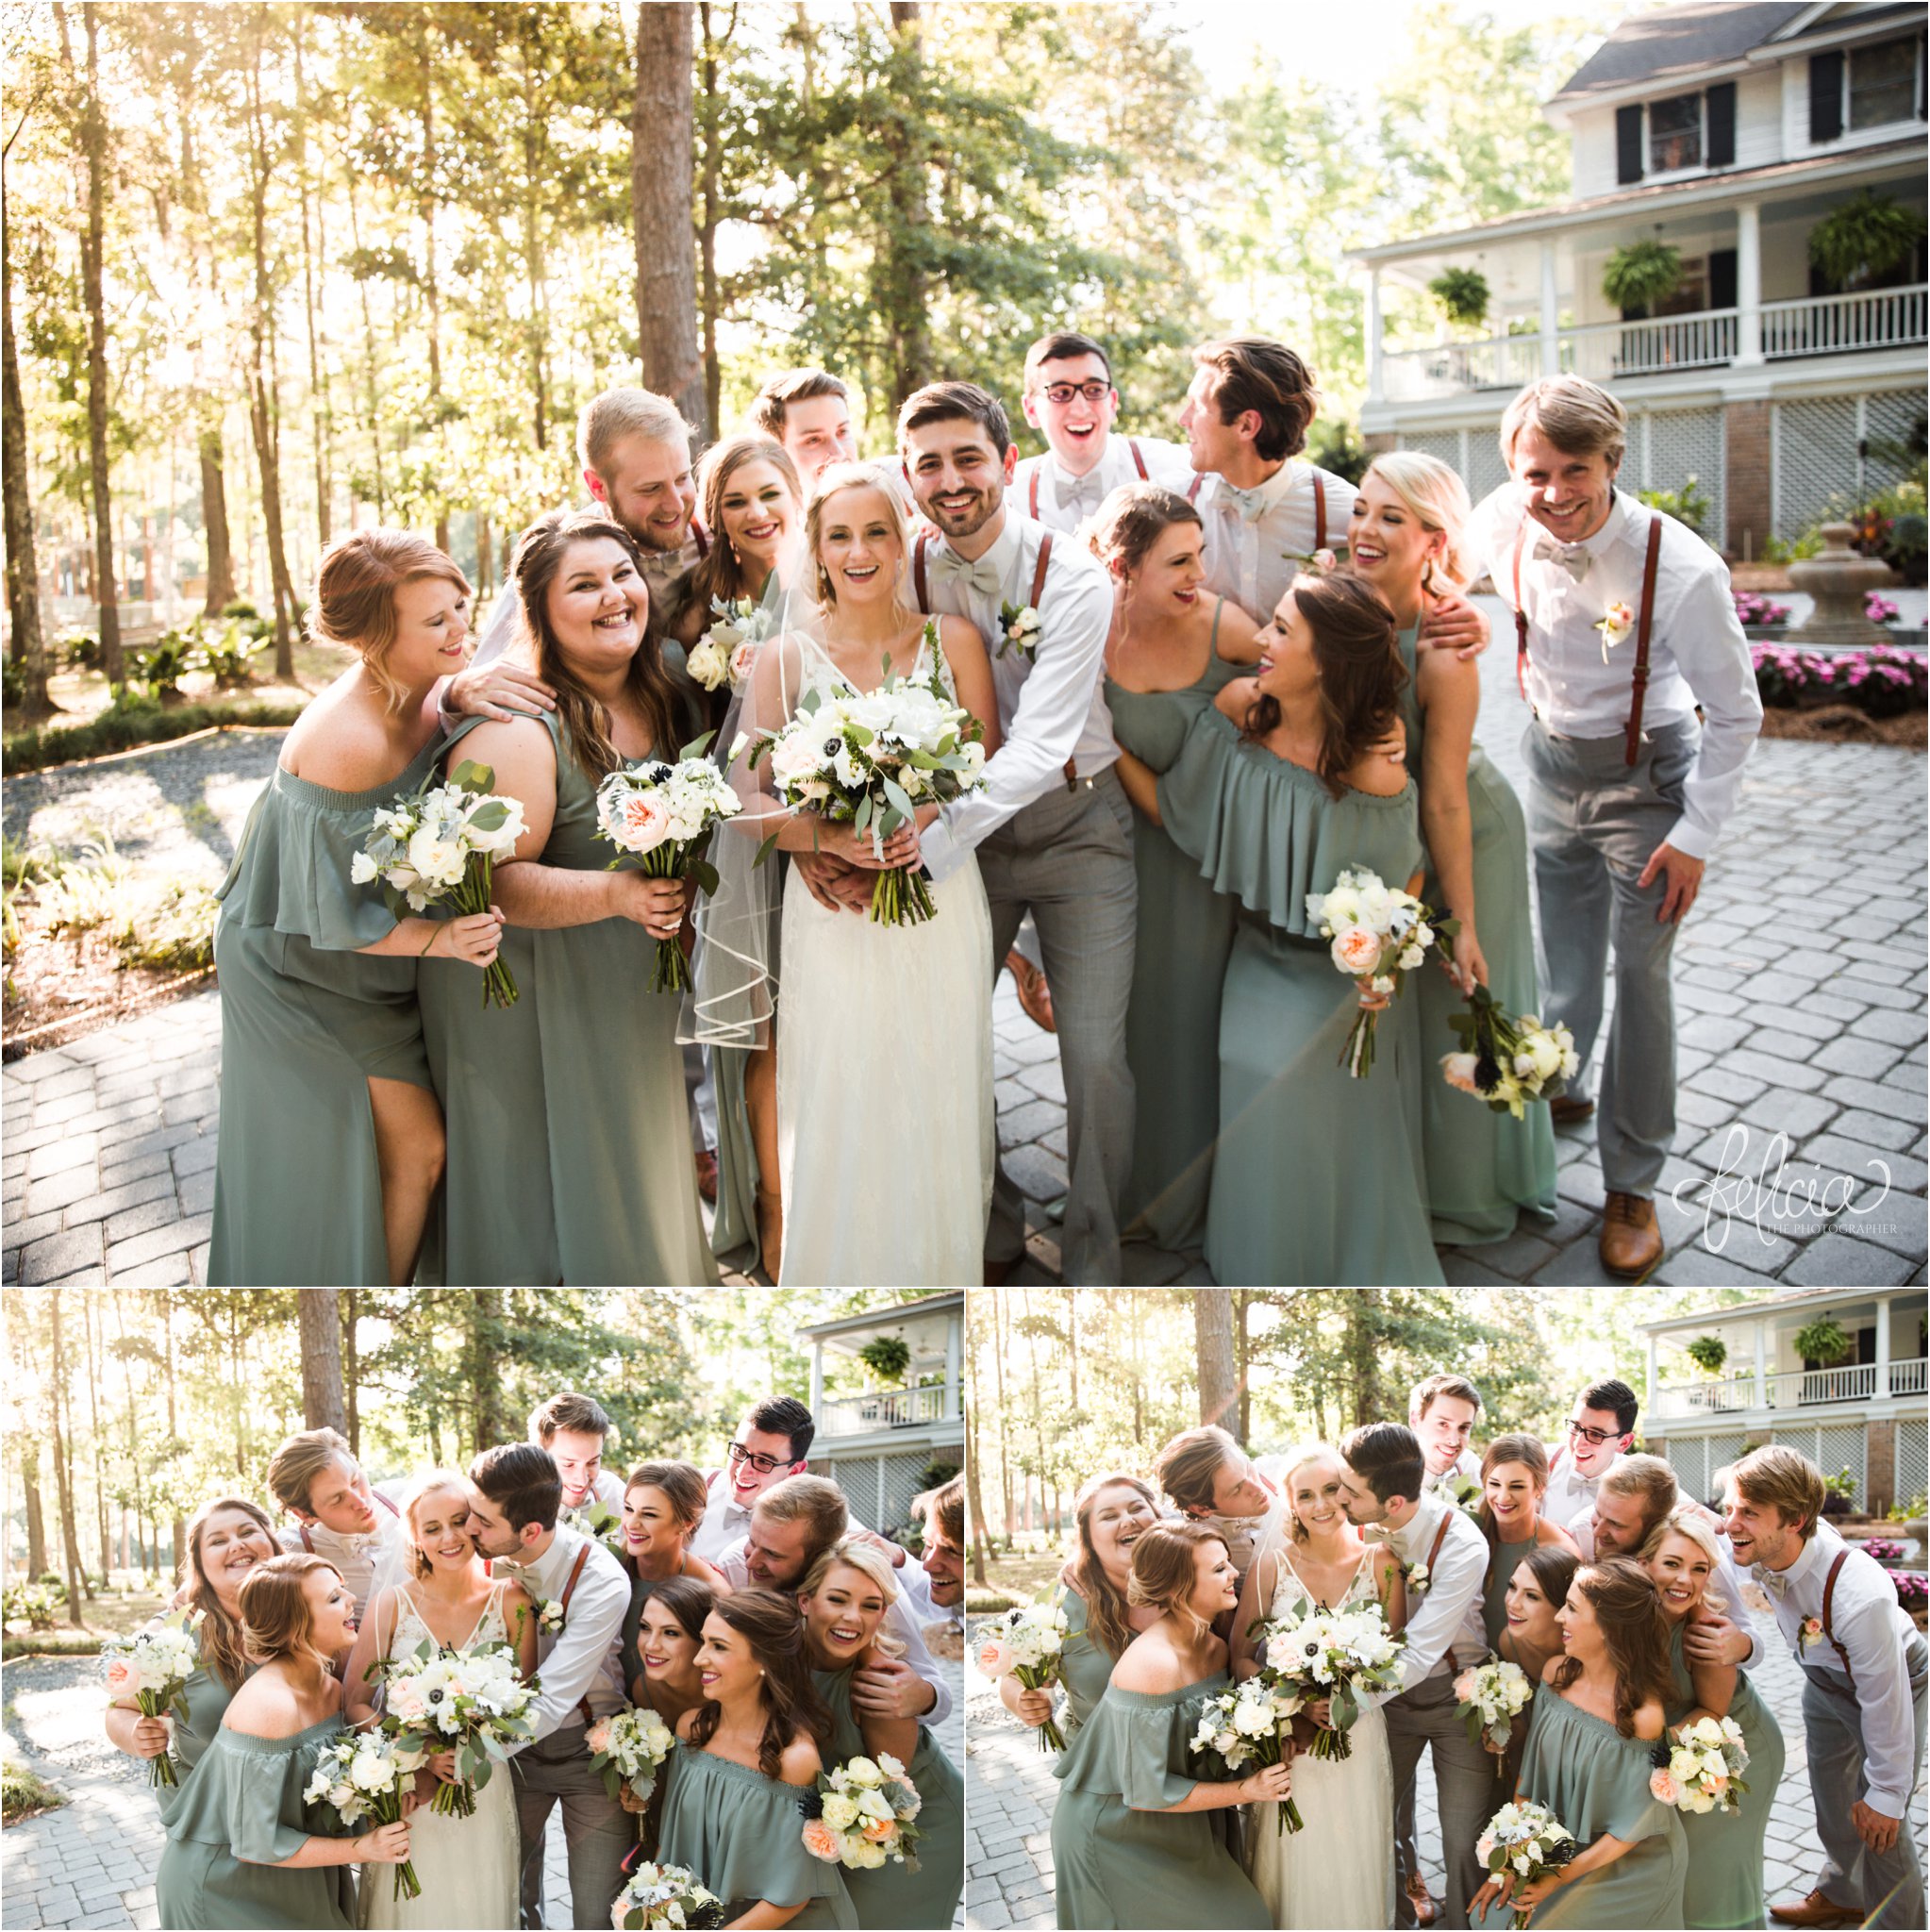 images by feliciathephotographer.com | destination wedding | the makey house | dave gibson coordinator | travel photographer | Savannah, georgia | southern | bridal party | big hug | laughter | joy | forest | trees | green | golden hour | kiss | 